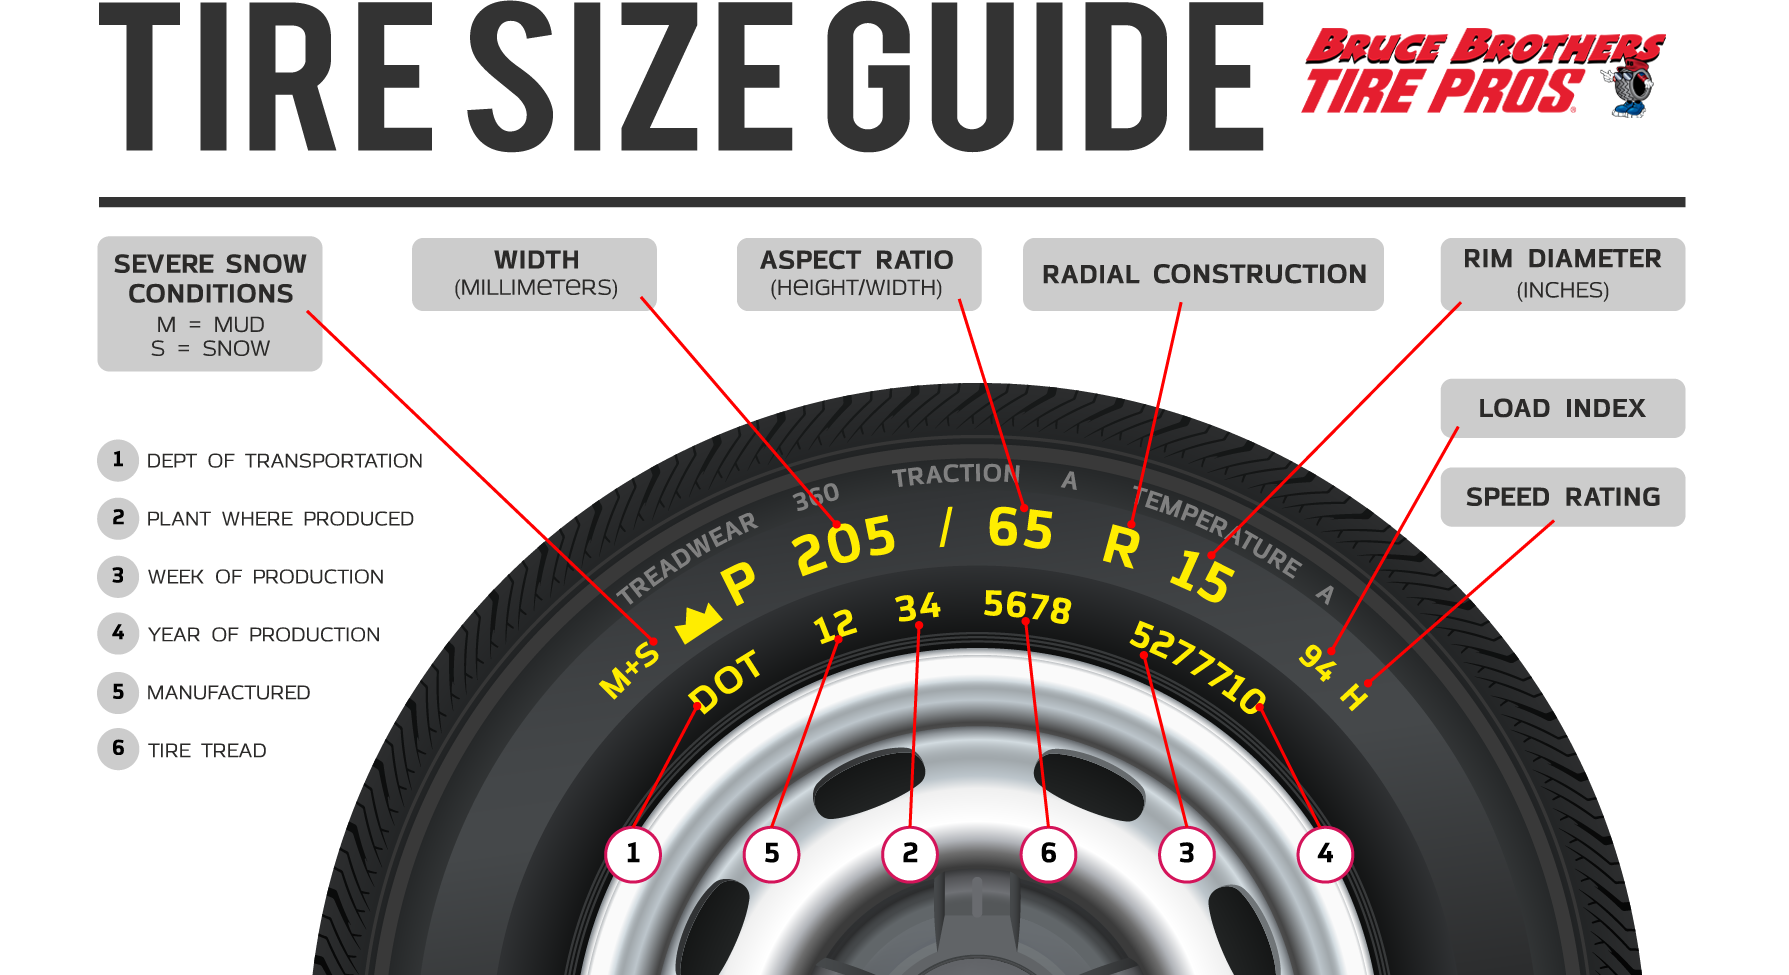 a tire size guide from bruce brothers tire pros